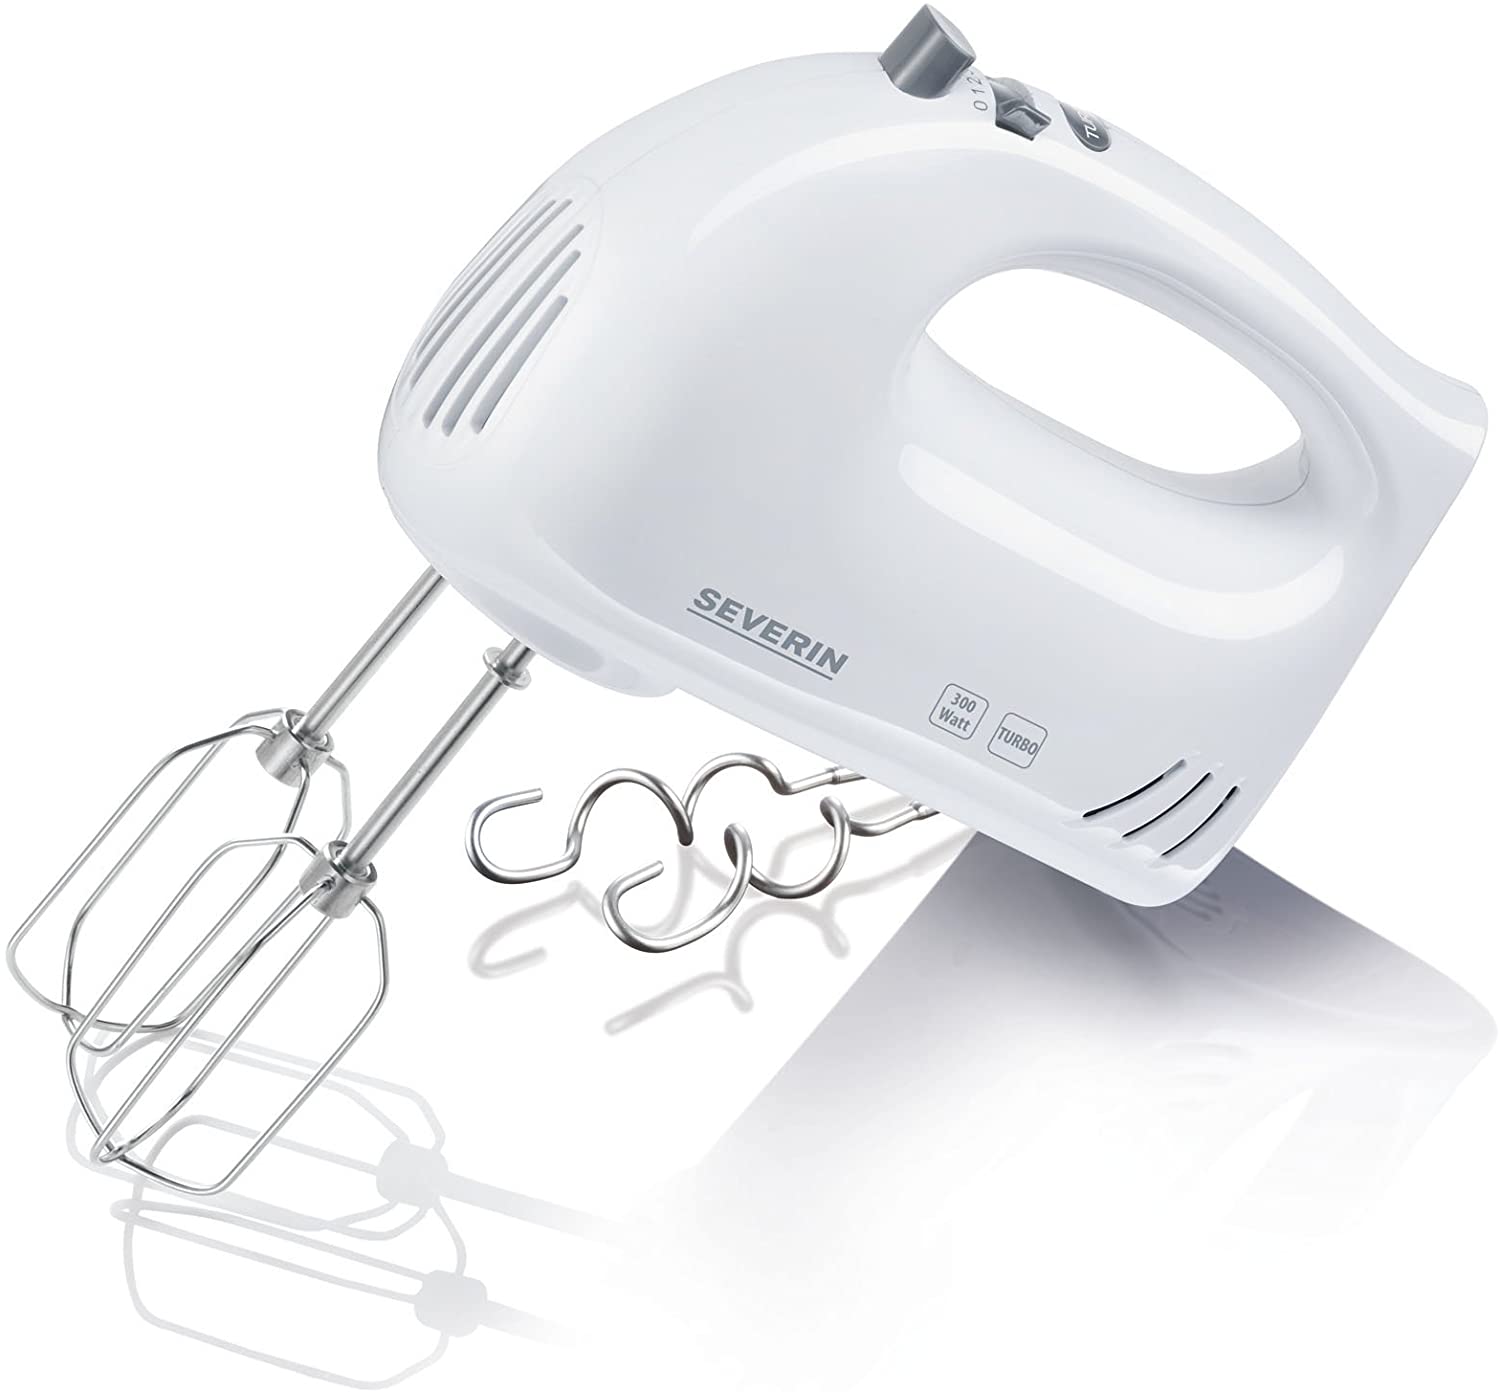 SEVERIN Hand mixer approx. 300 W, 5 speed settings, turbo, 2 whisks, 2 dough hooks